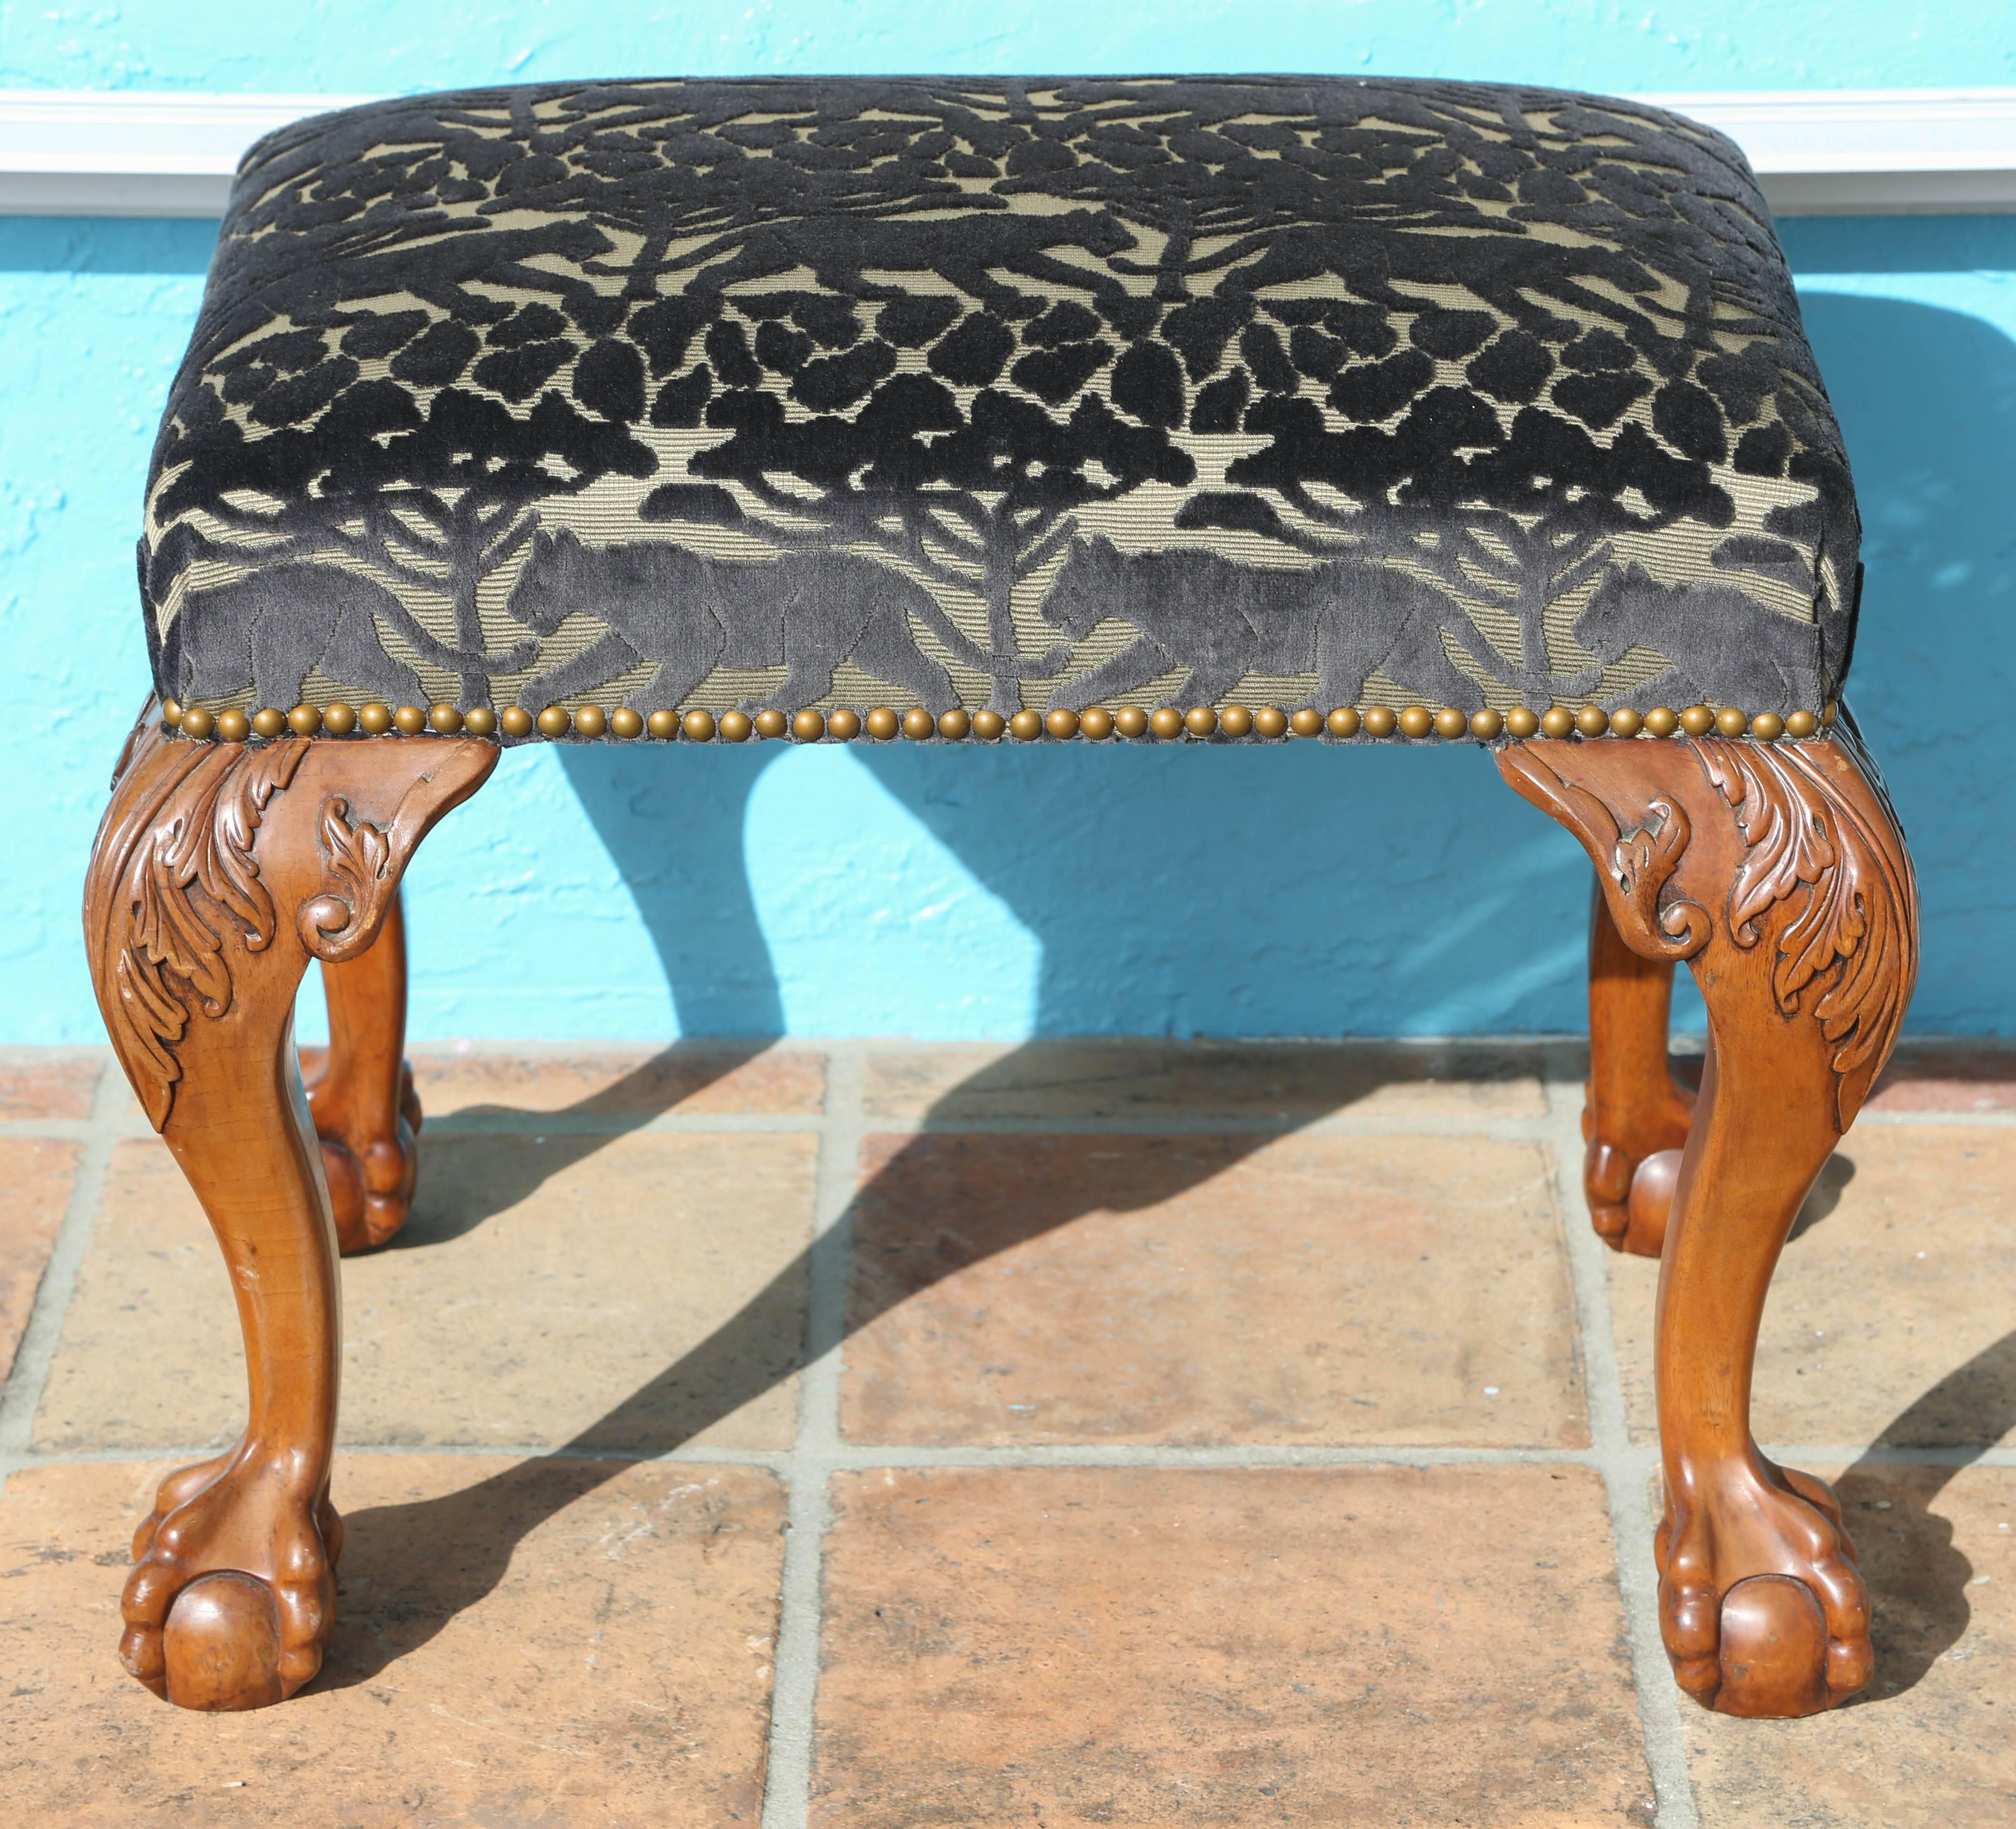 Covered with a cut velvet panther motif fabric the dramatic pair features crisp carving terminating in claw feet.